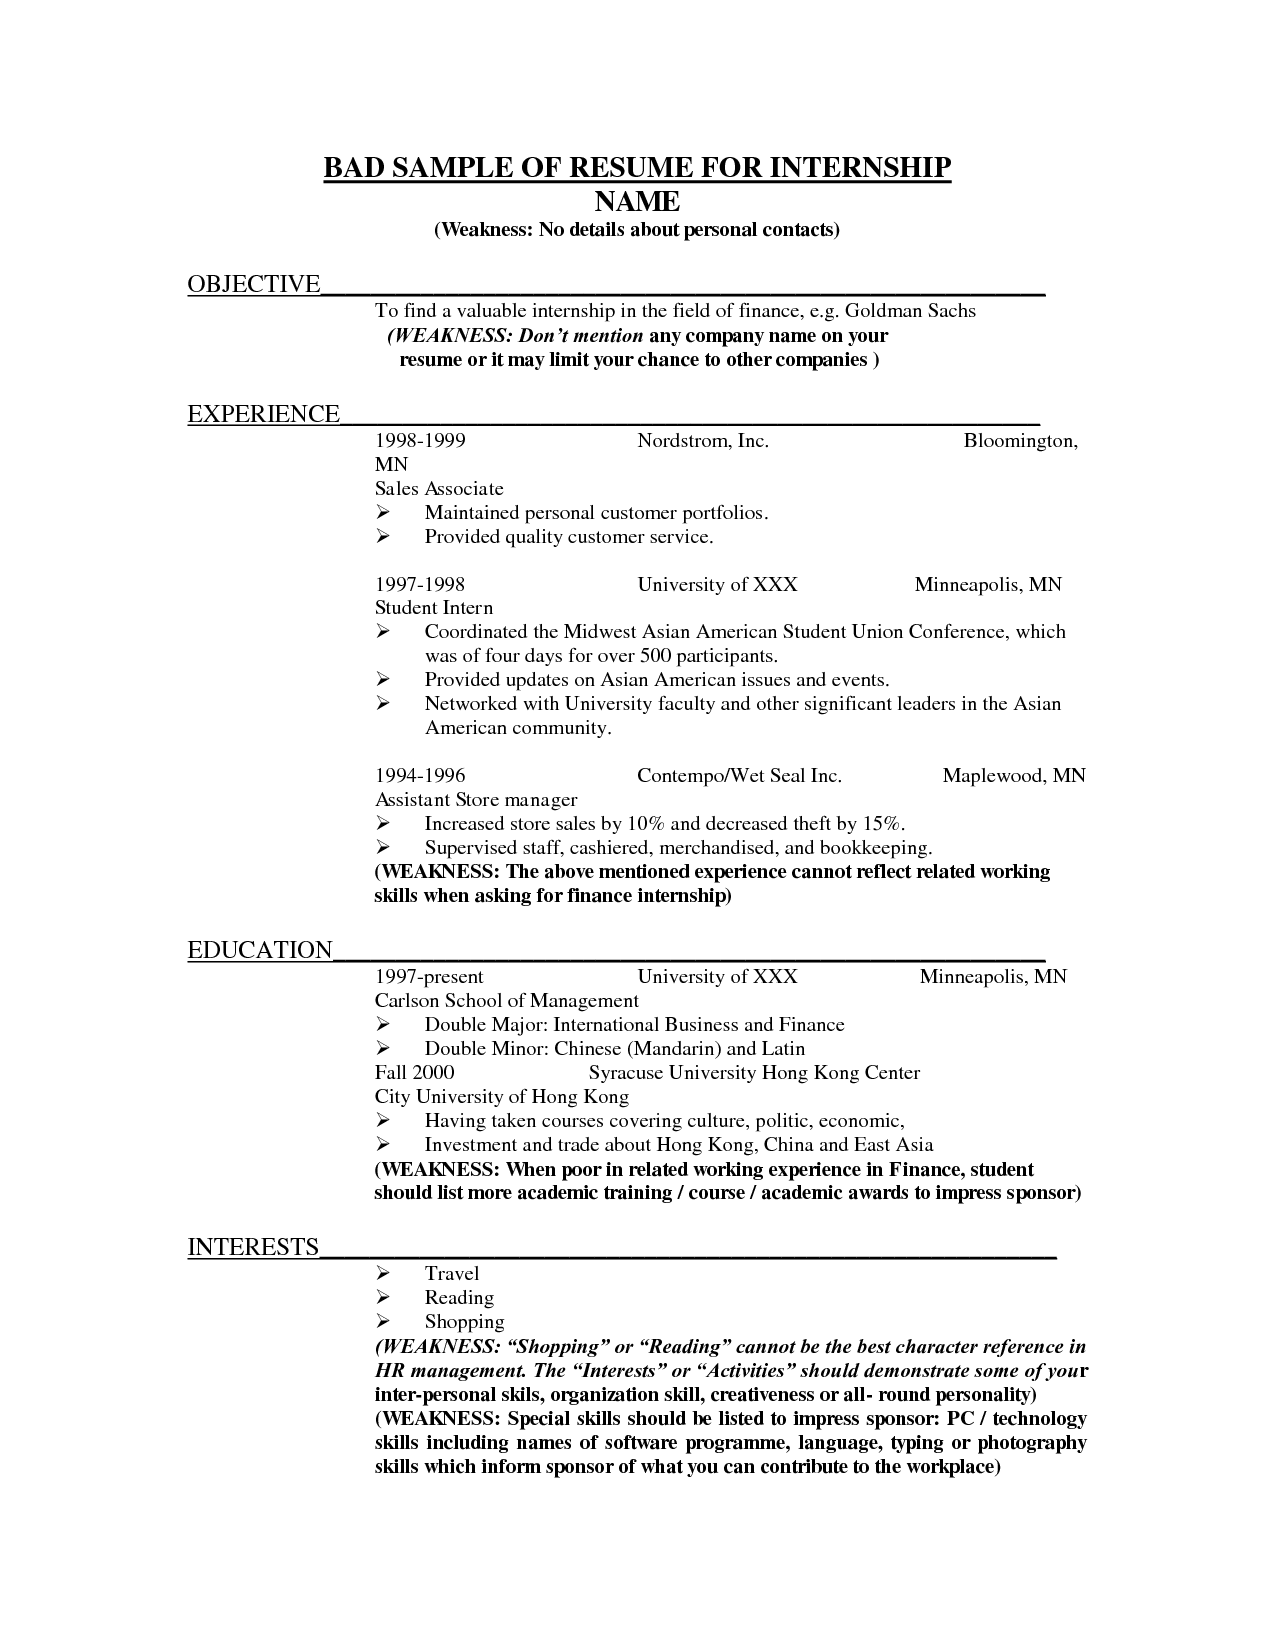 examples of a bad resumes thevillas co